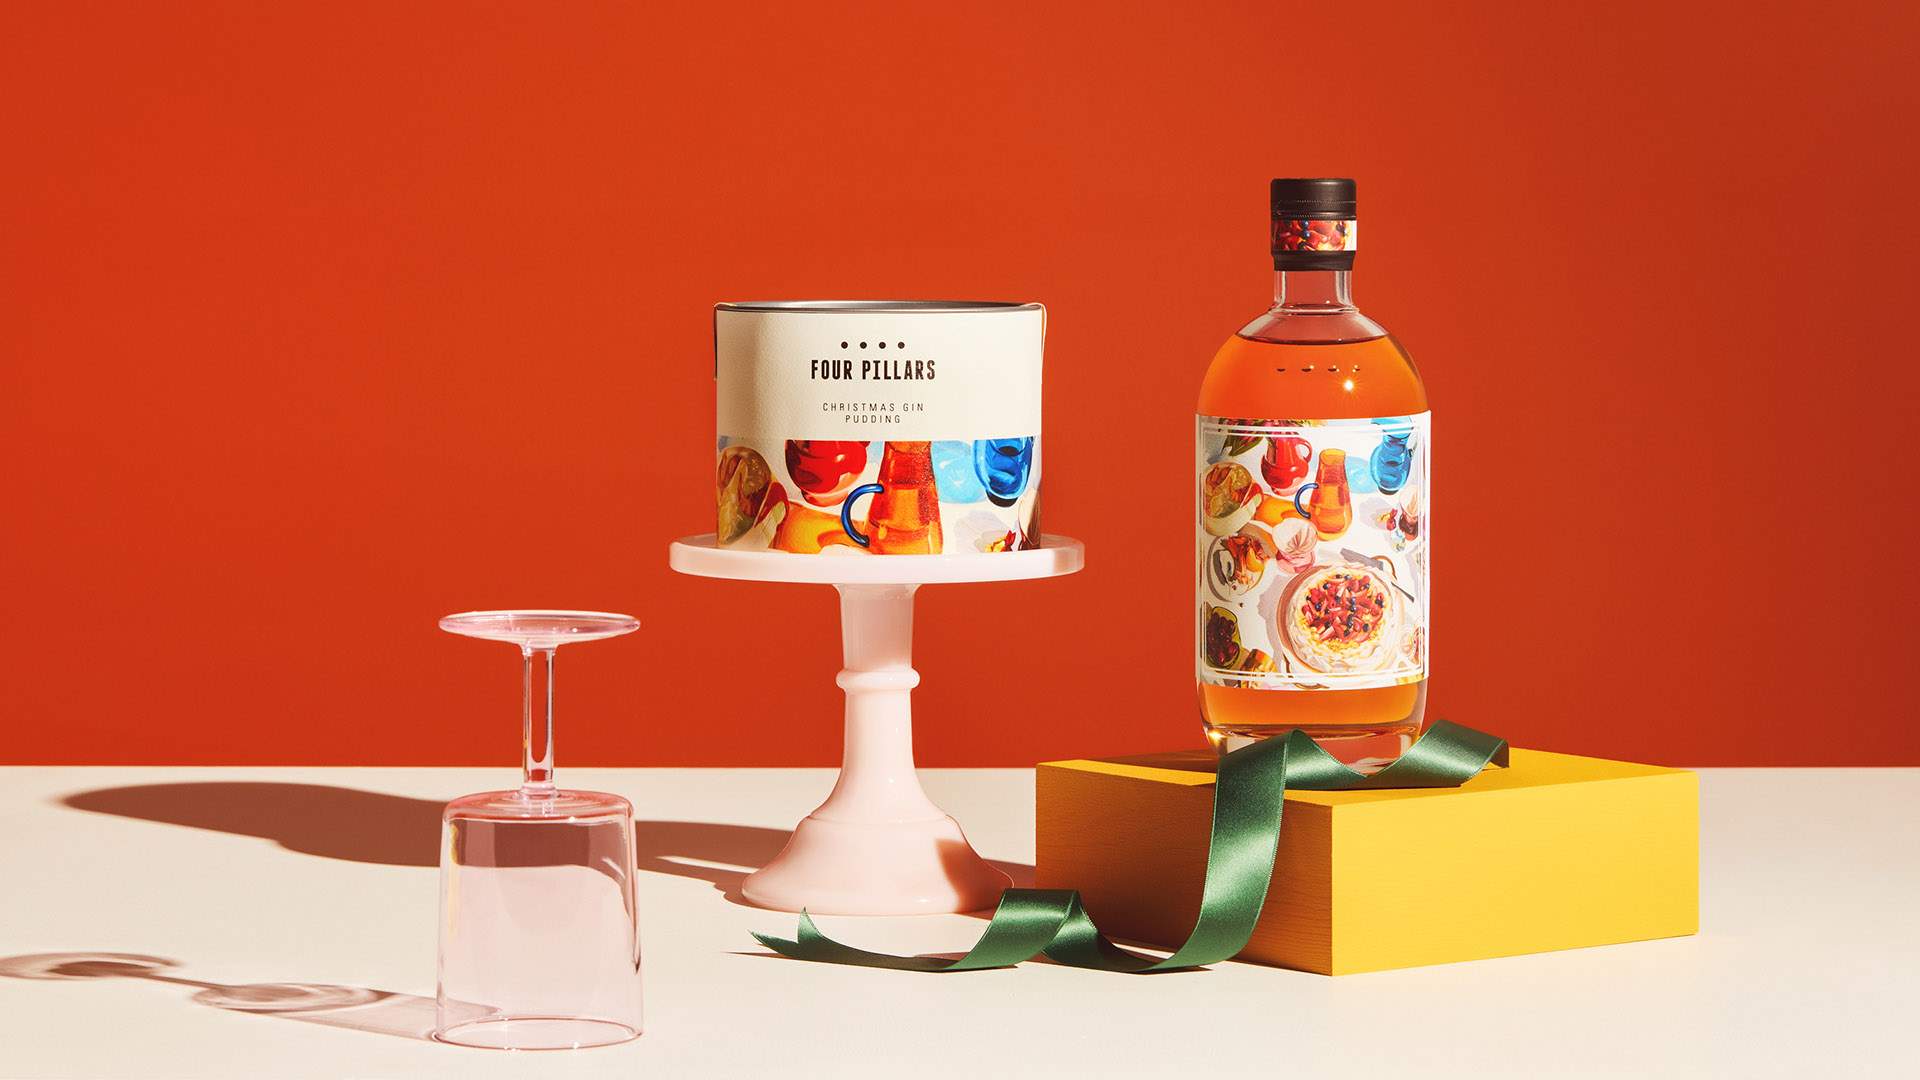 Four Pillars Is About to Drop Its 2021 Christmas Gin So You Can Get Drunk on Pud with Nan